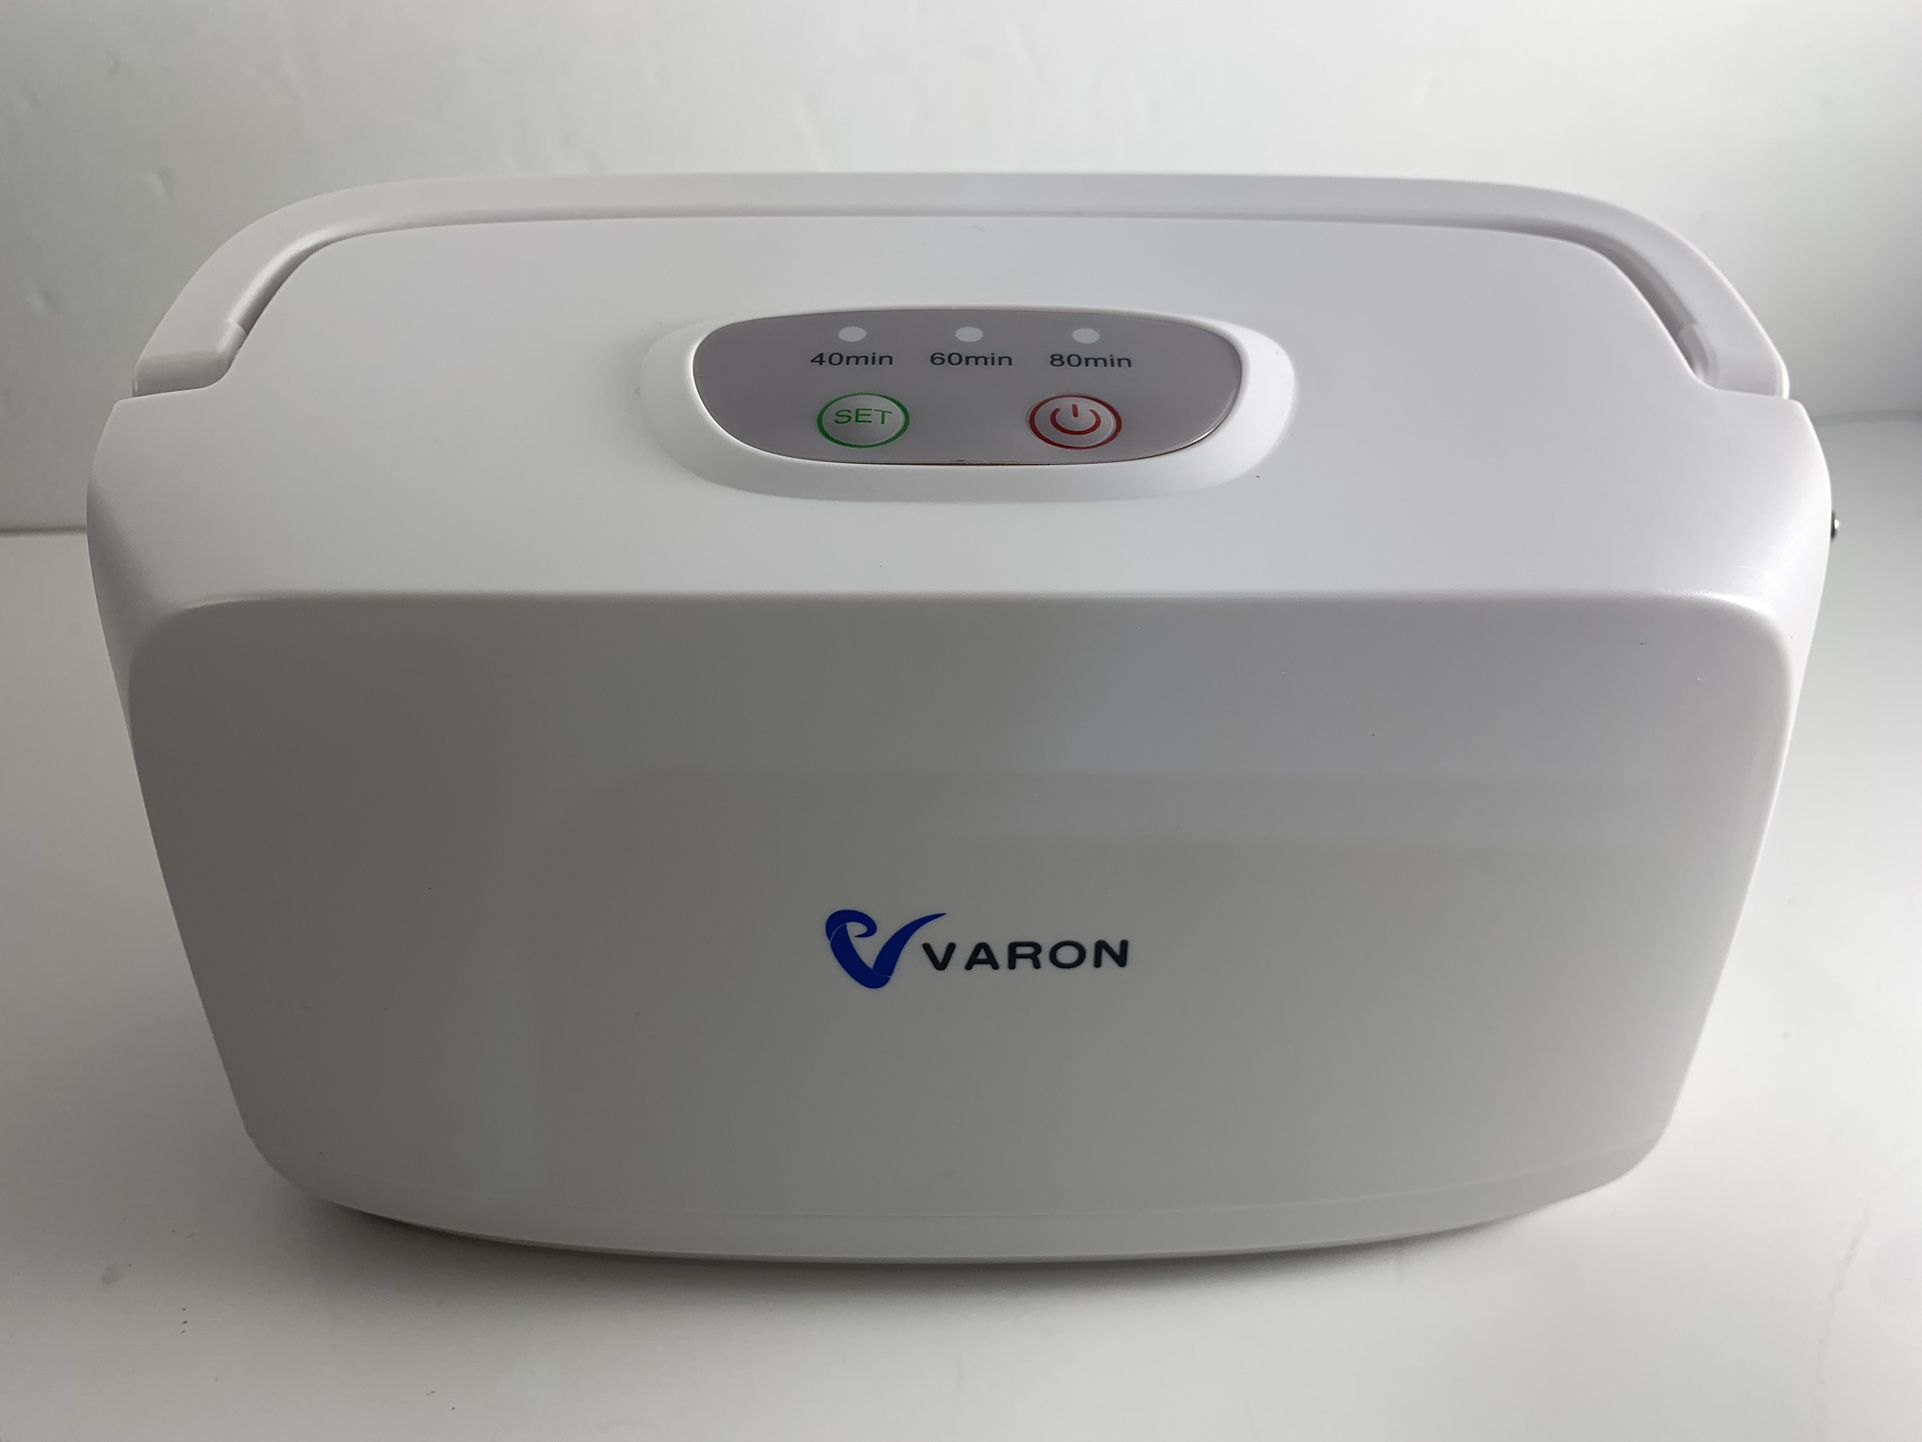 Varon NT-3 Portable Oxygen Concentrator w/ Rechargeable Battery & Car Adapter